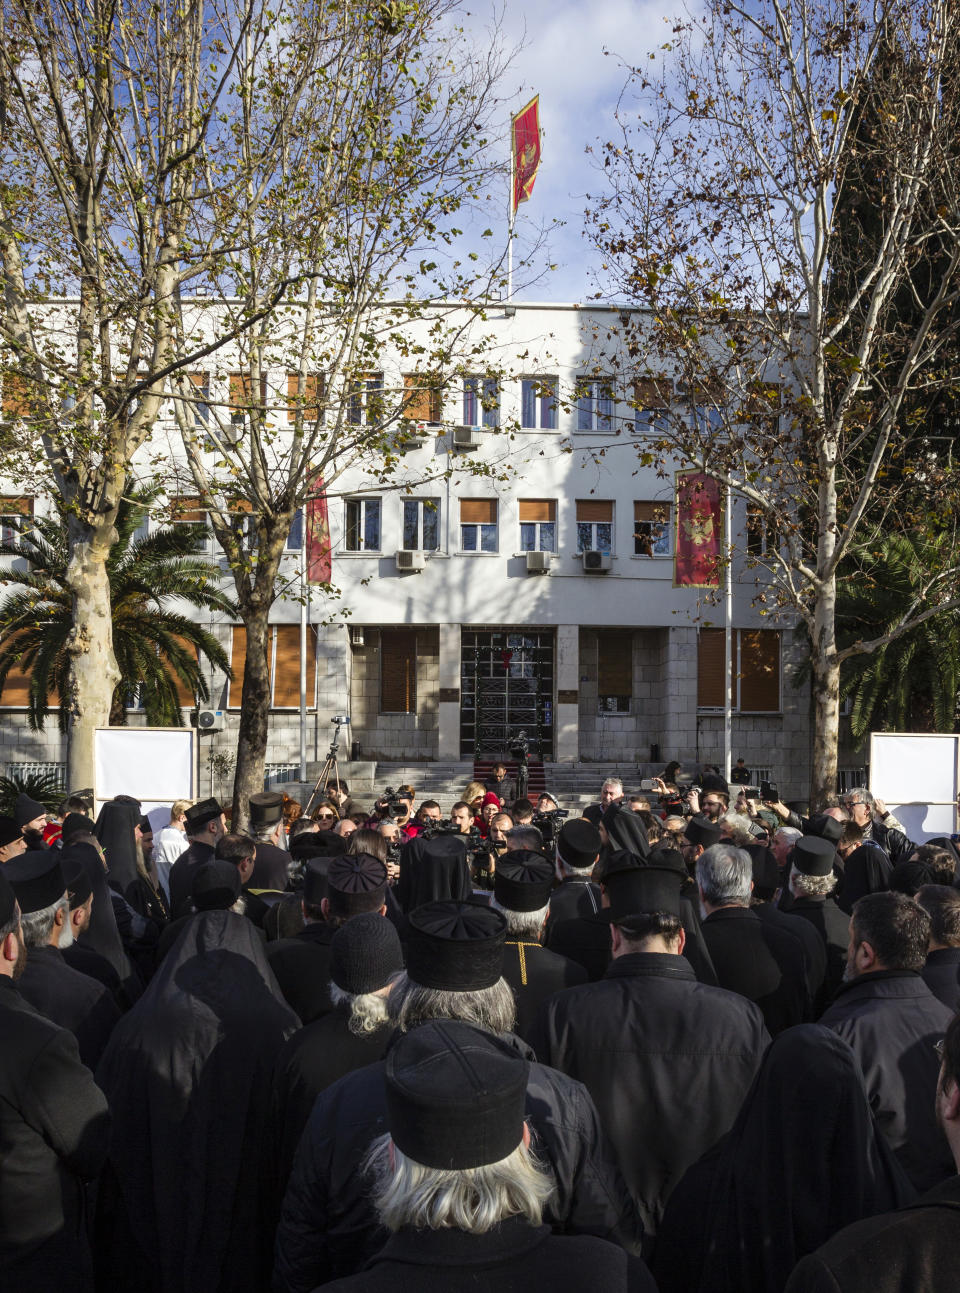 Serbian Orthodox Church clergy in Montenegro gather in front of parliament building as they protest the planned adoption of a religious law that they say will pave the way to strip the church of its property, in Podgorica, Montenegro, Tuesday, Dec. 24, 2019. Montenegro's pro-Western president has accused the church of promoting pro-Serb policies in Montenegro and seeking to undermine the country's statehood since it split from Serbia in 2006. (AP Photo/Risto Bozovic)